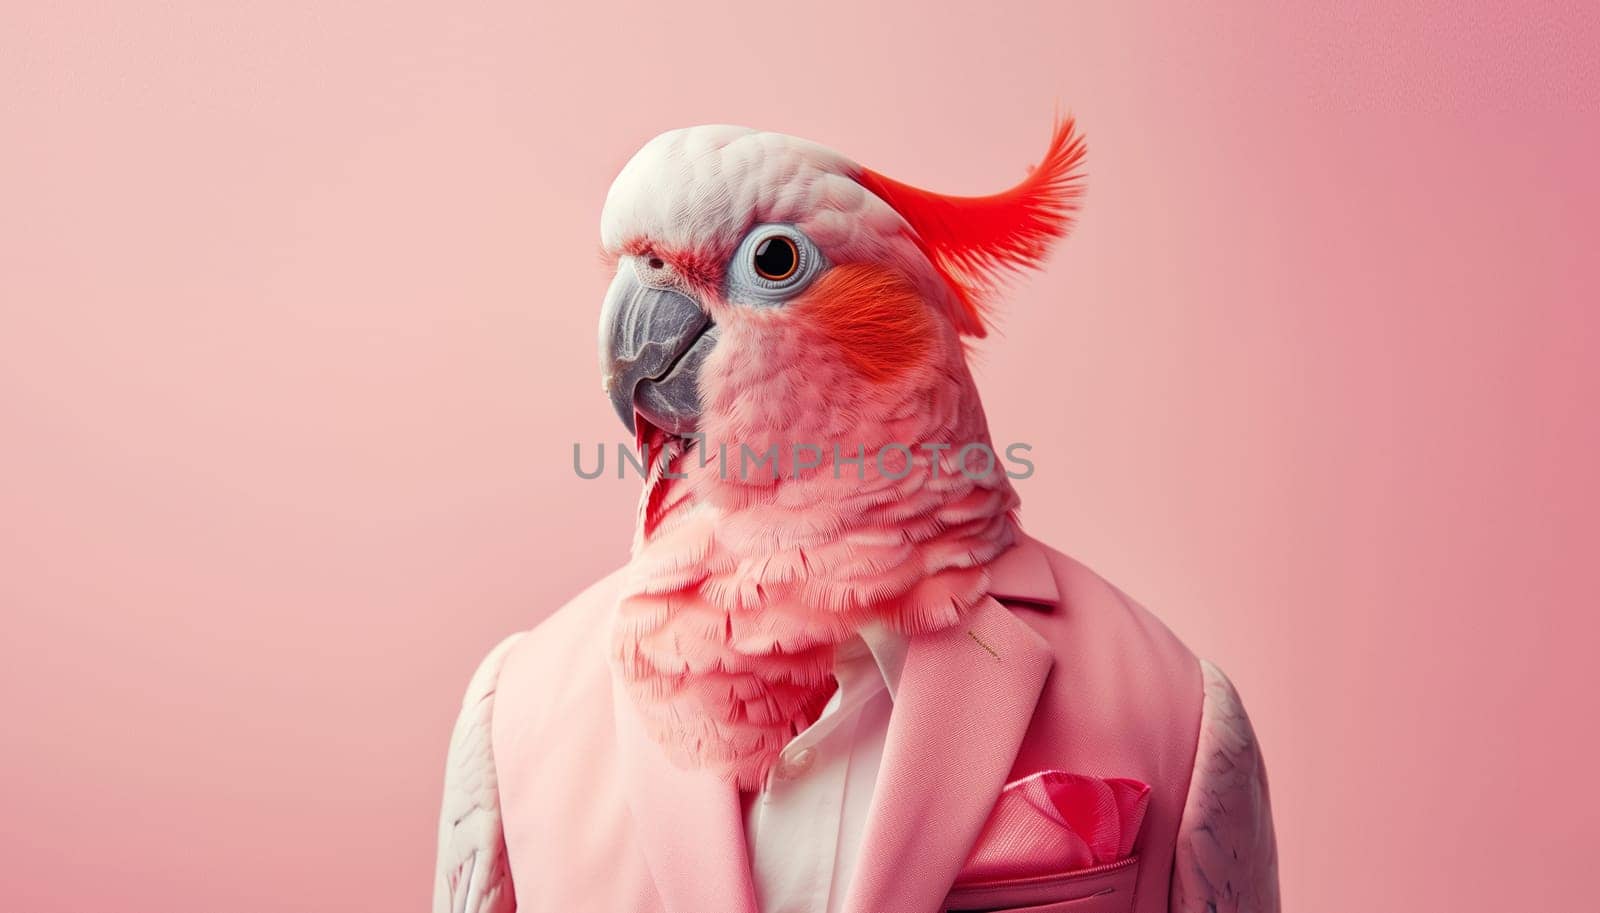 Portrait of stylish funny parrot bird in a suit looking at the camera on a pink background, animal, creative concept